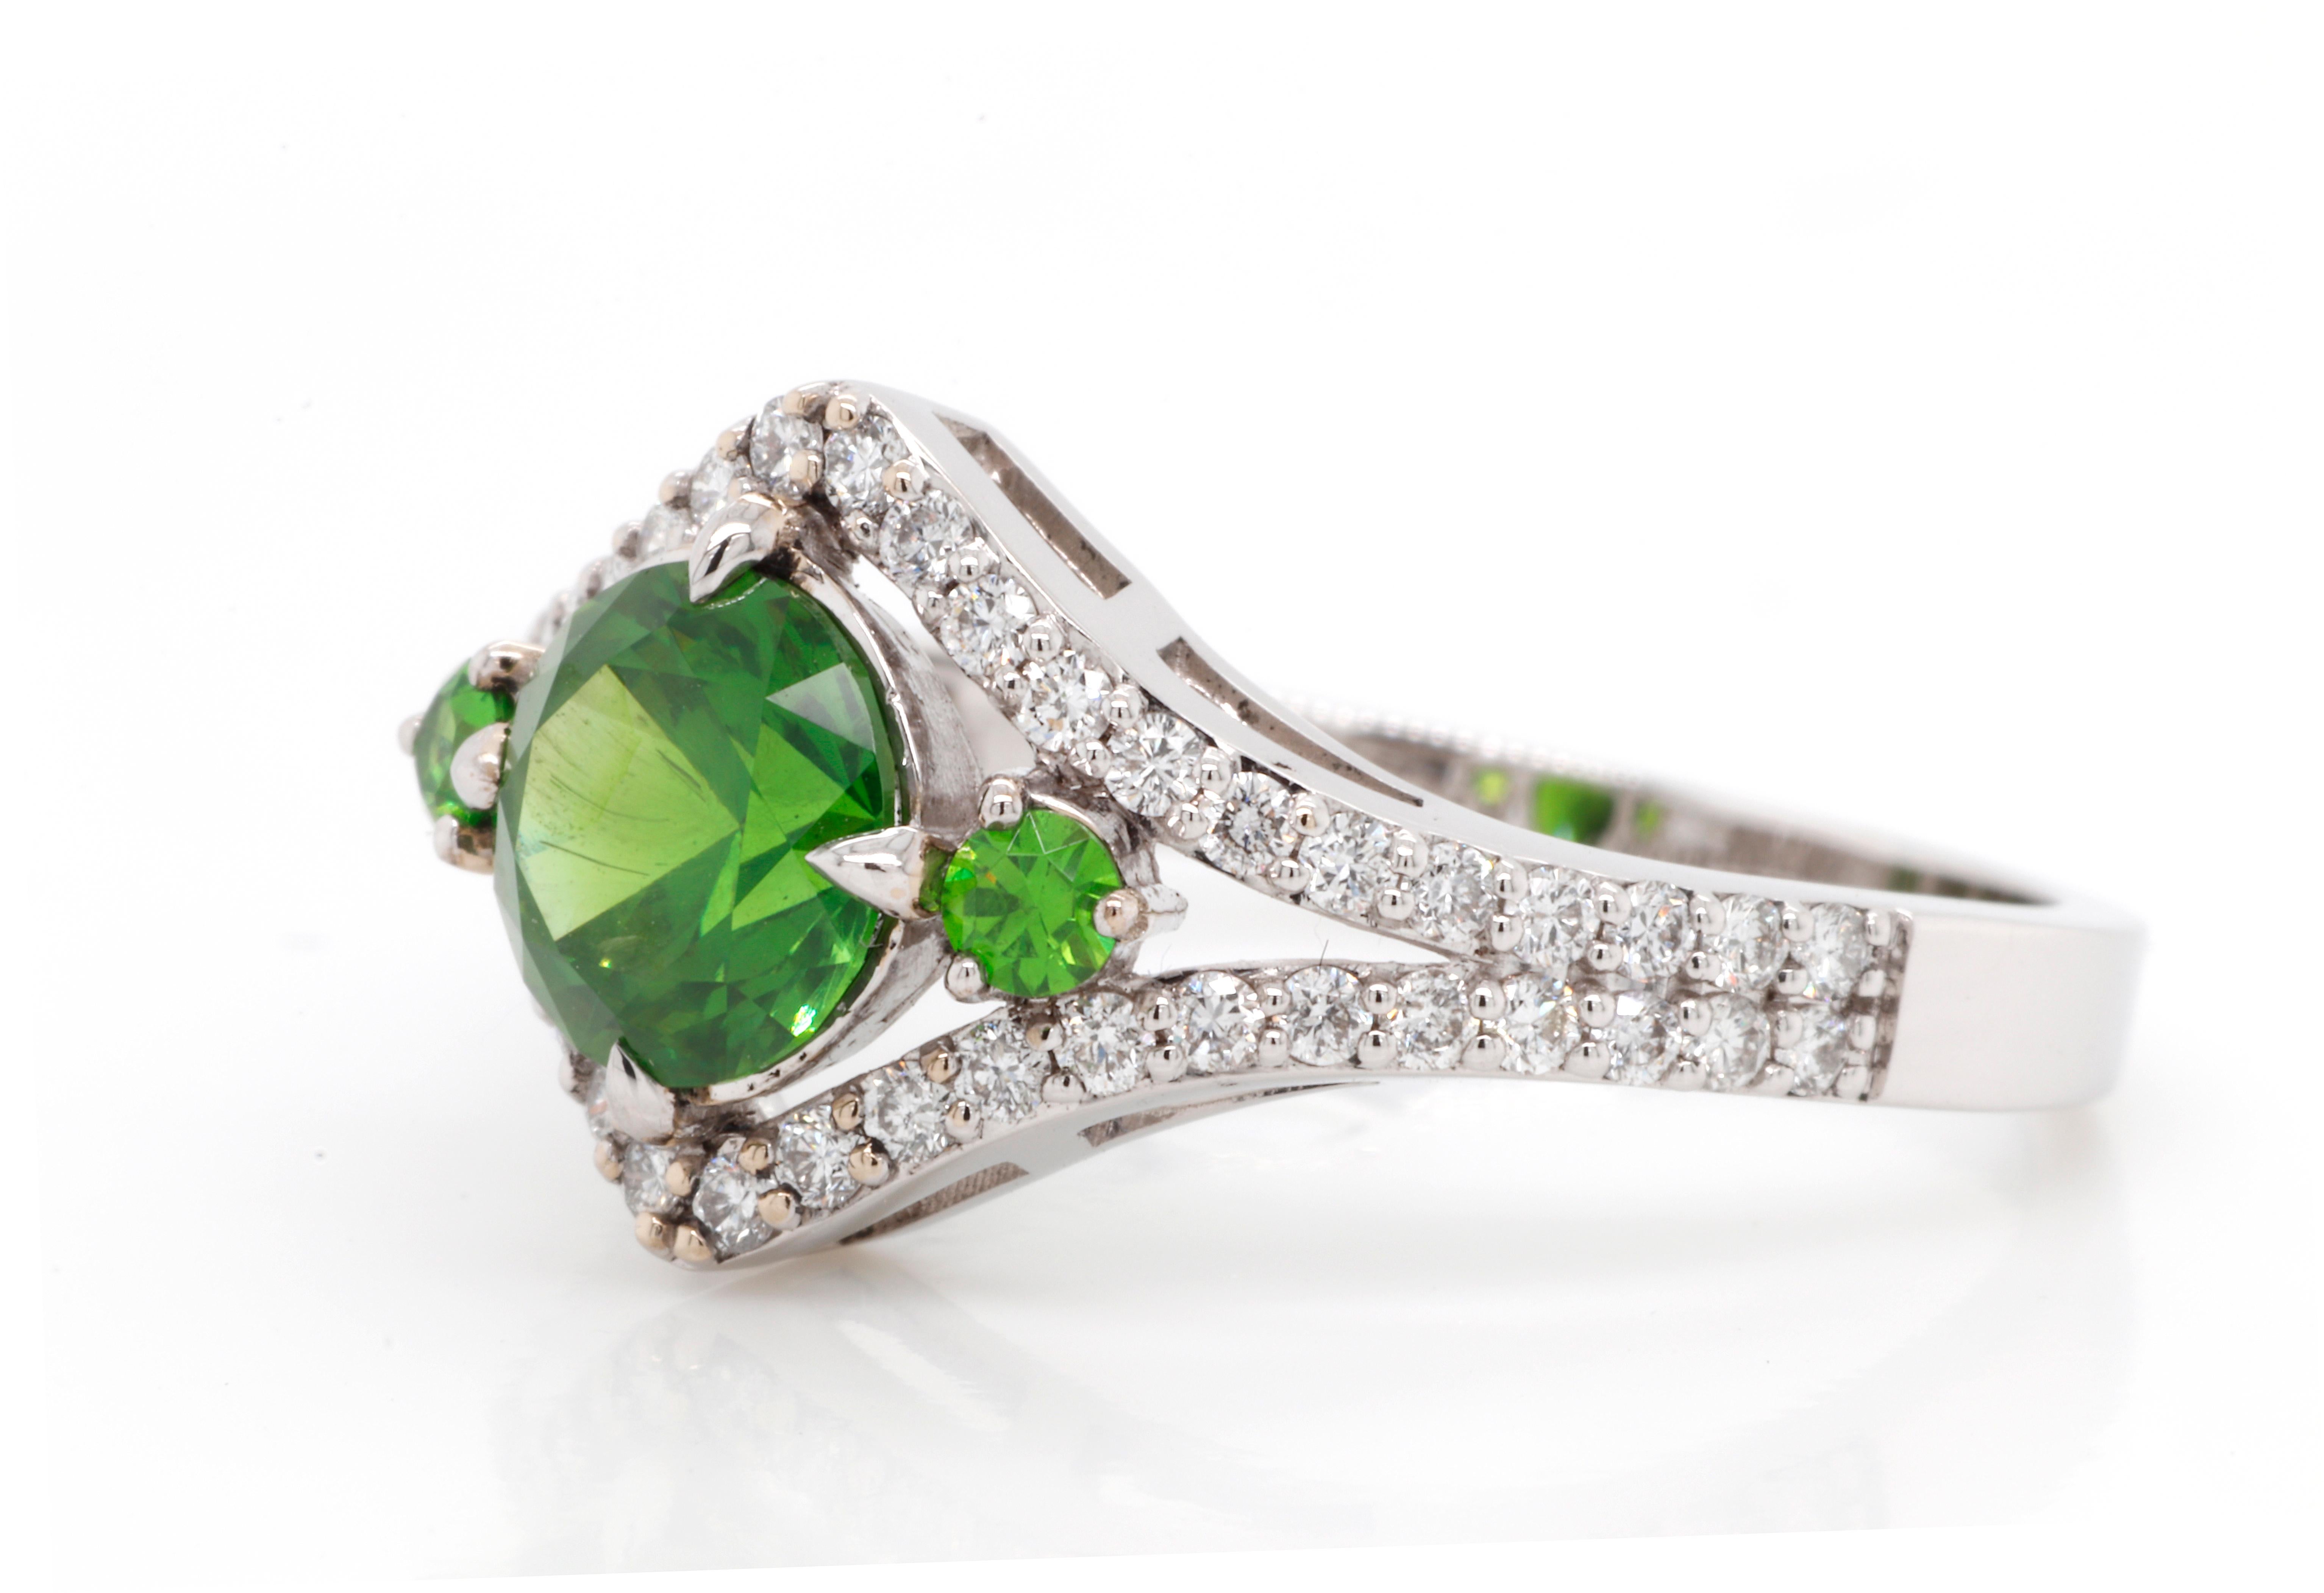 Ellegant 18K White Gold Demantoid Ring with Diamonds. Featuring 1.19 ct of top quality Russian Demantoid combined with natural 0.36 ctw Diamonds G-H color and VVS1 clarity. 
Demantoid is a unique rare stone, called a star of garnets, origin is from